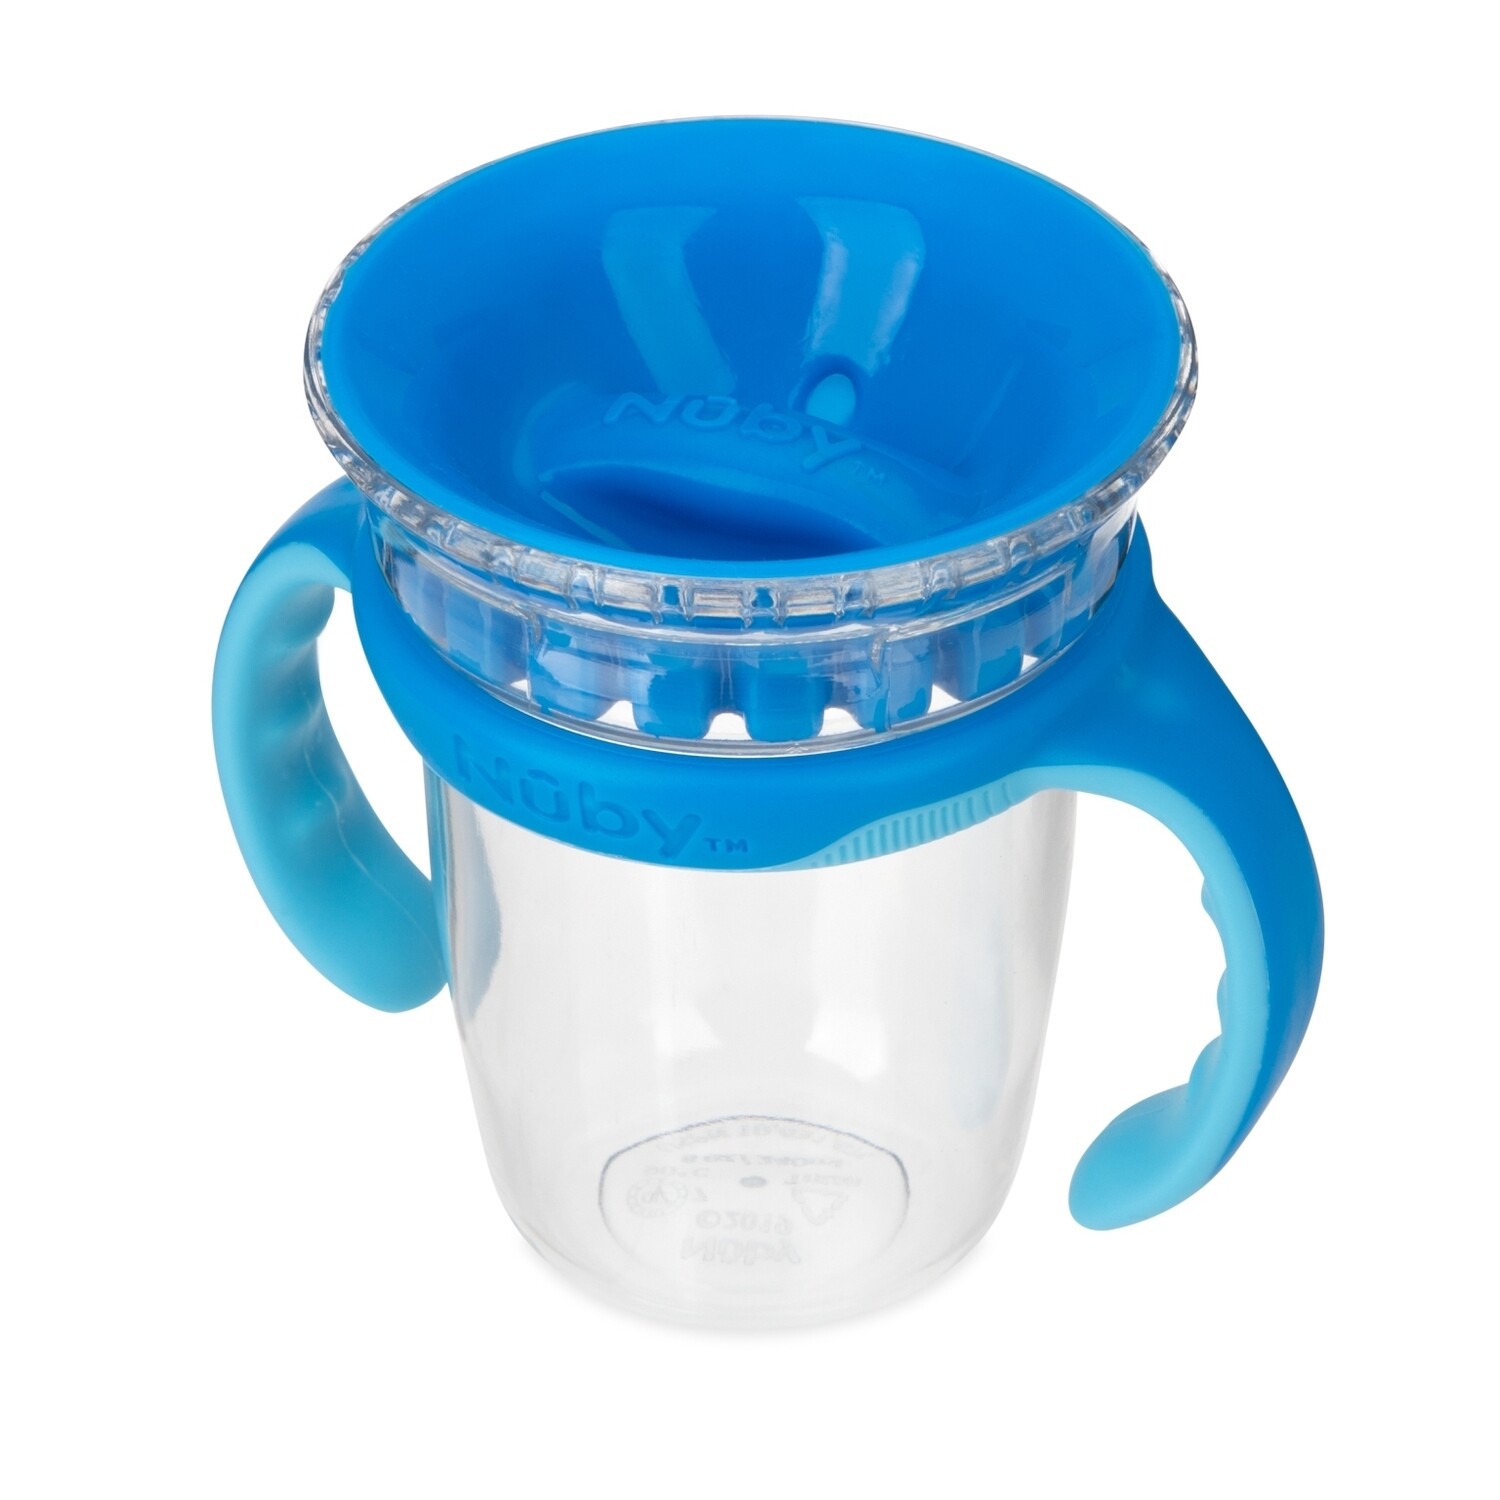 . Case of [48] Nuby Drinking Cups - 10 oz, 360 Rim Flow, Removable Handles .